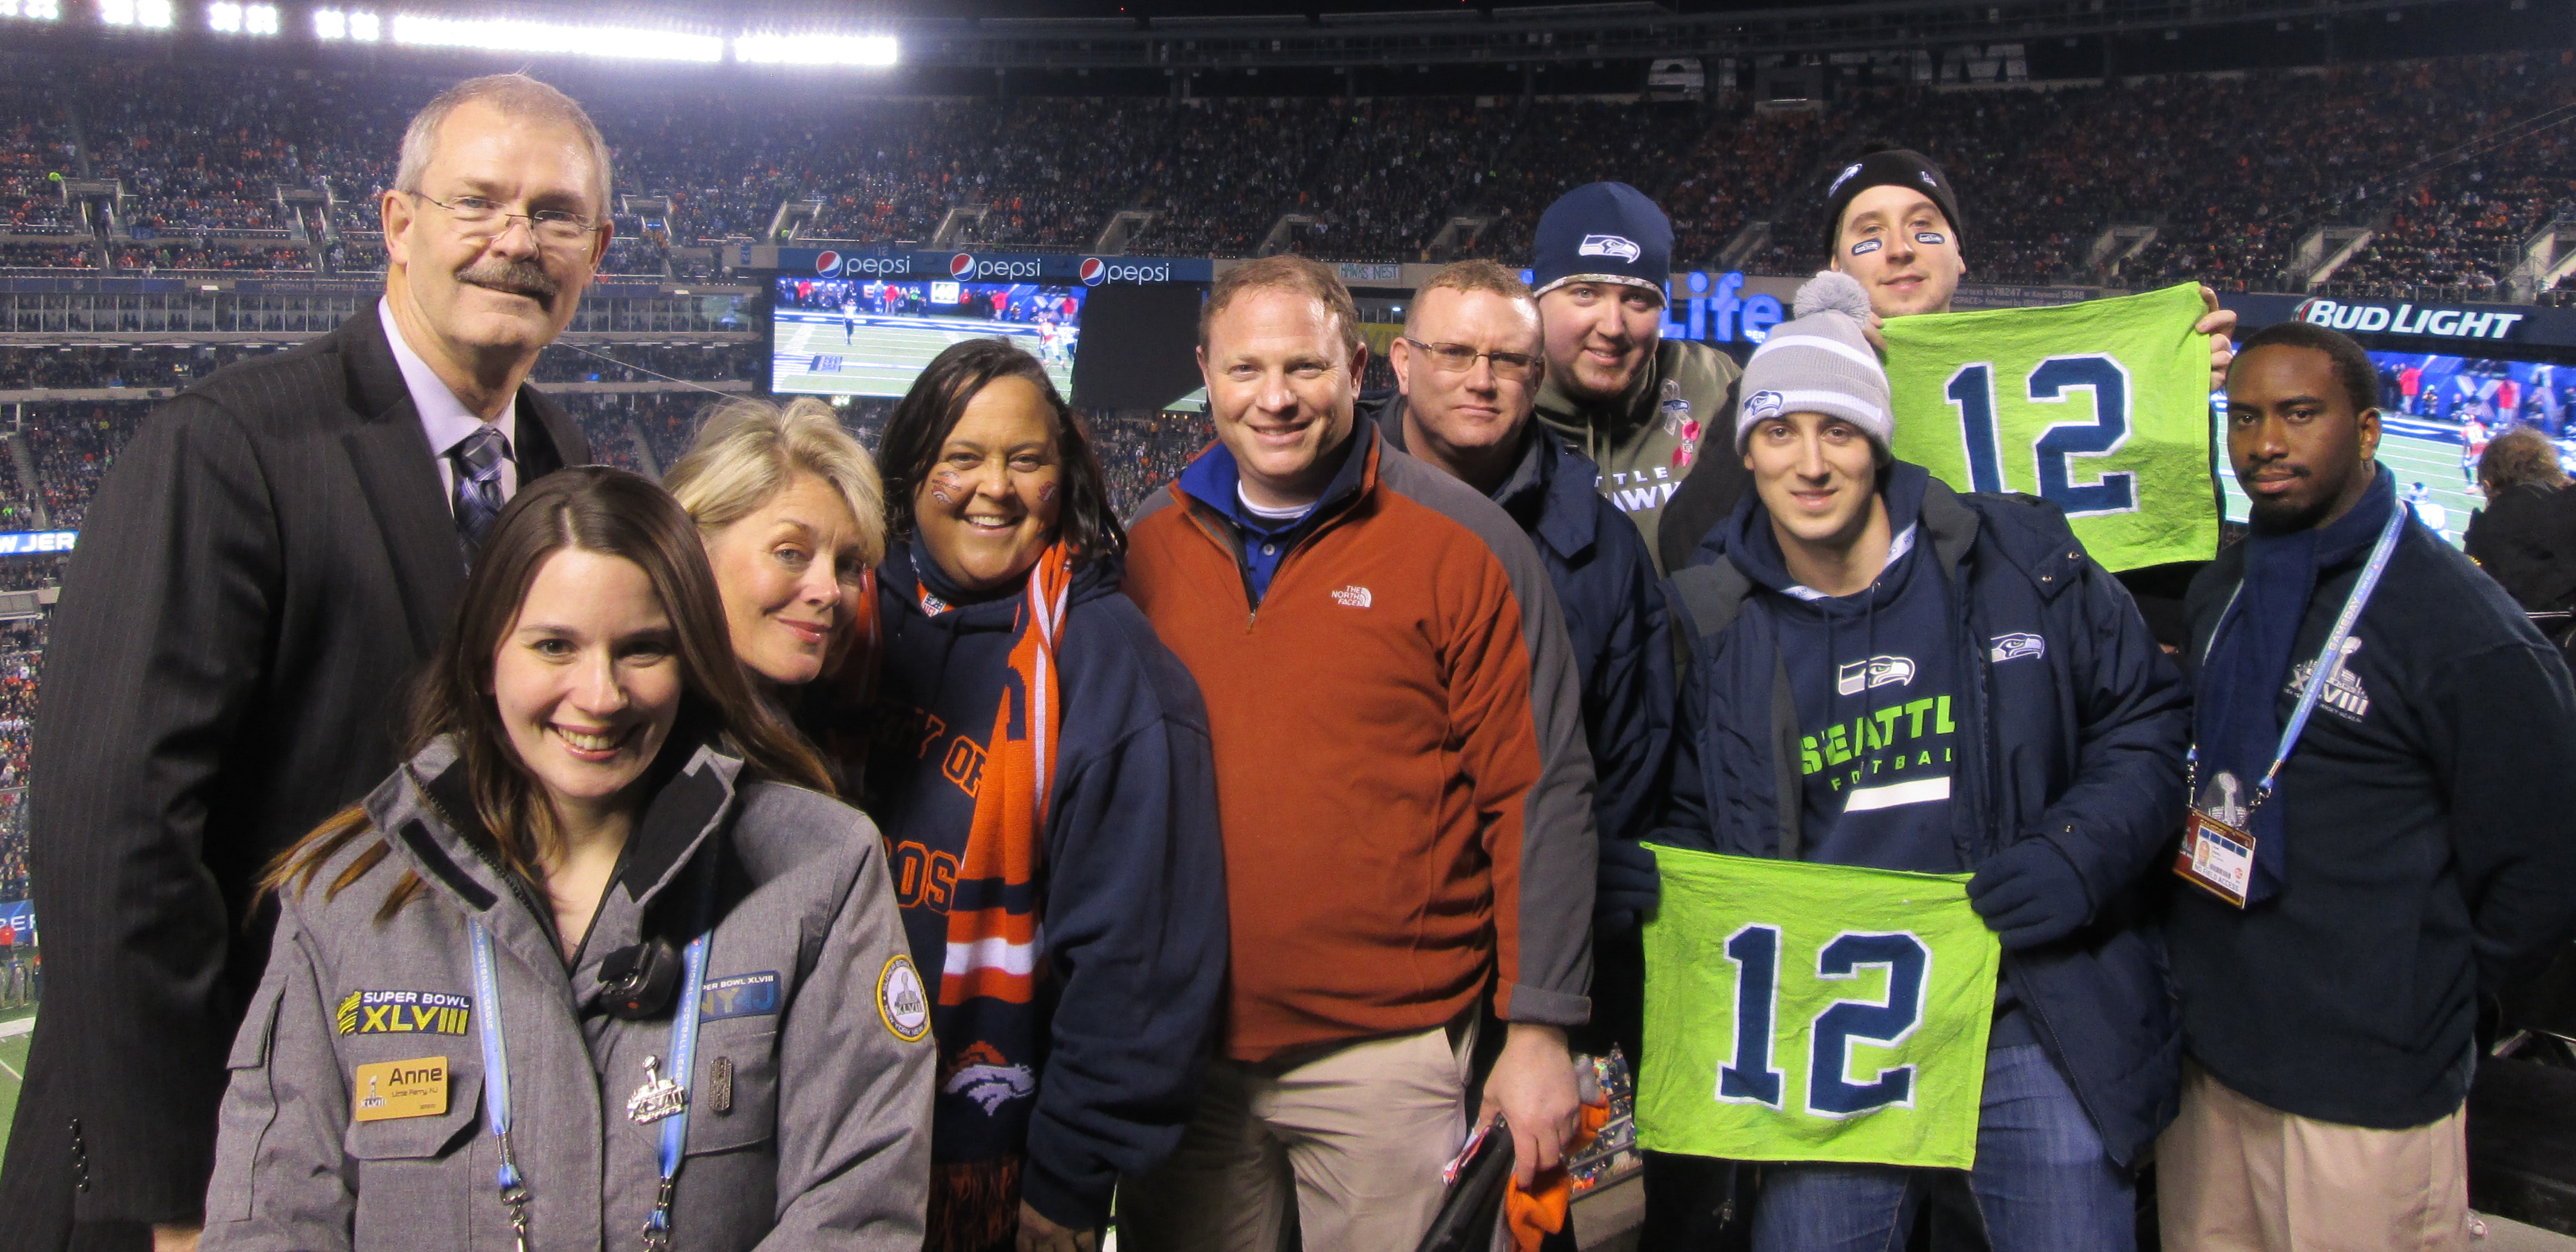 Partners in responsibility pose with the Designated Drivers for the Season from the Denver Broncos and Seattle Seahawks